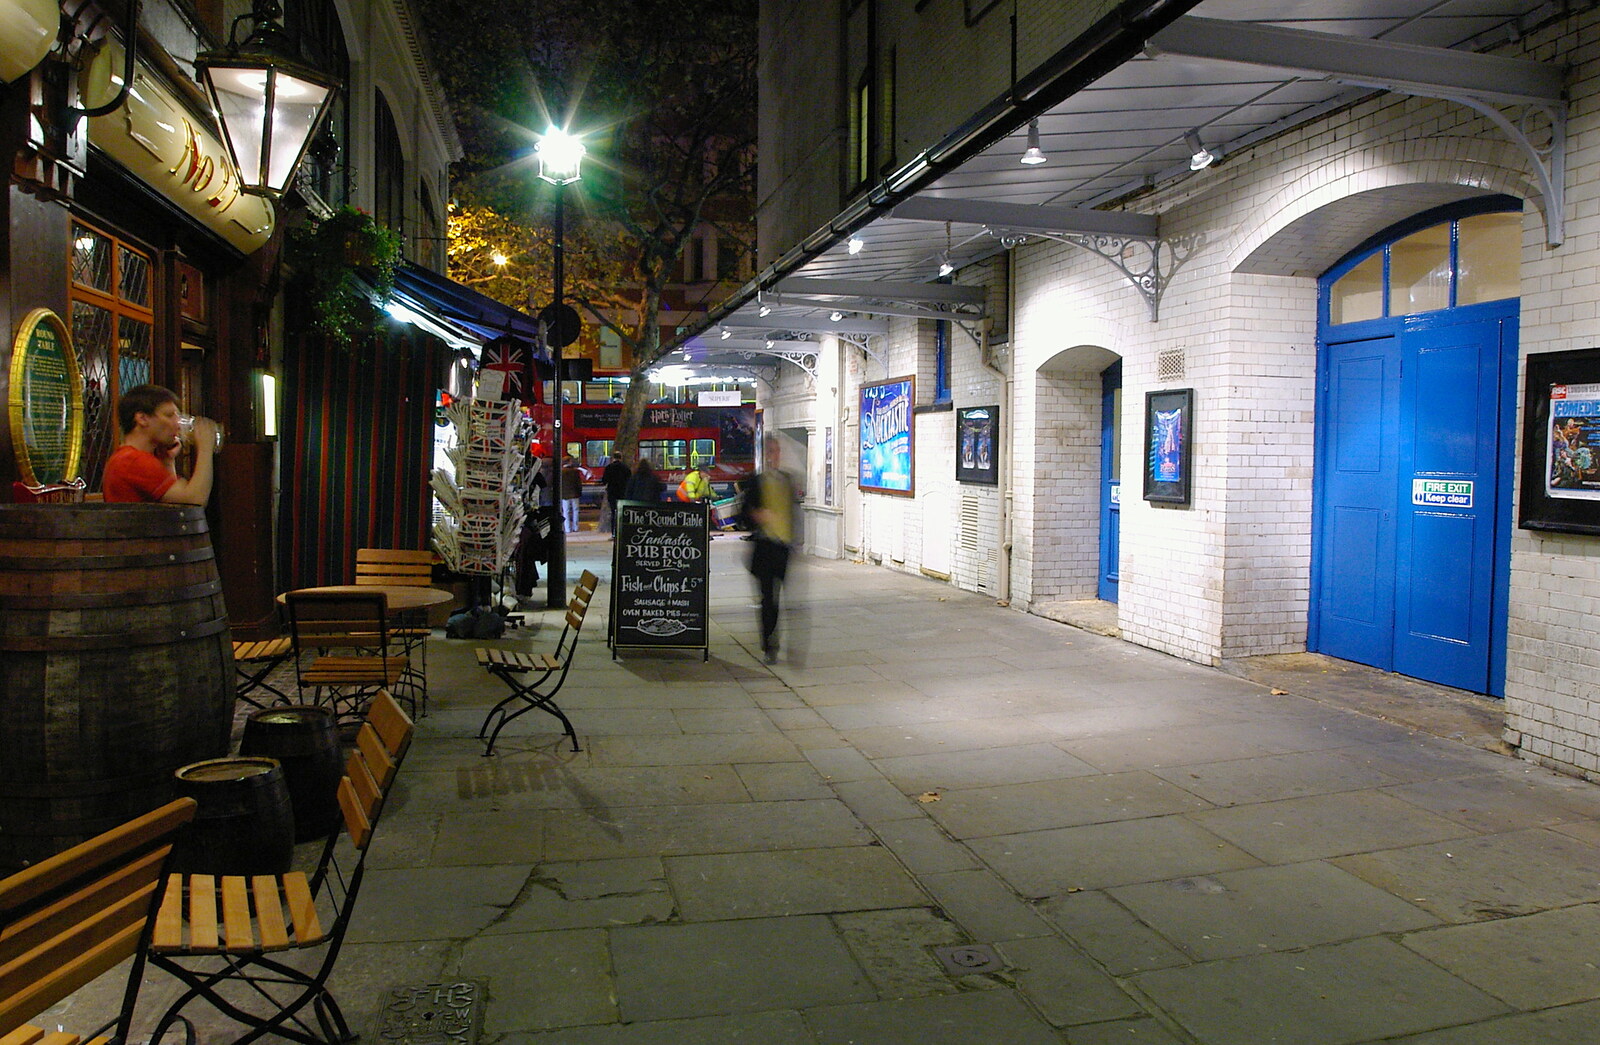 Theatre alleyway from Qualcomm Europe All-Hands at the Berkeley Hotel, London - 9th November 2005